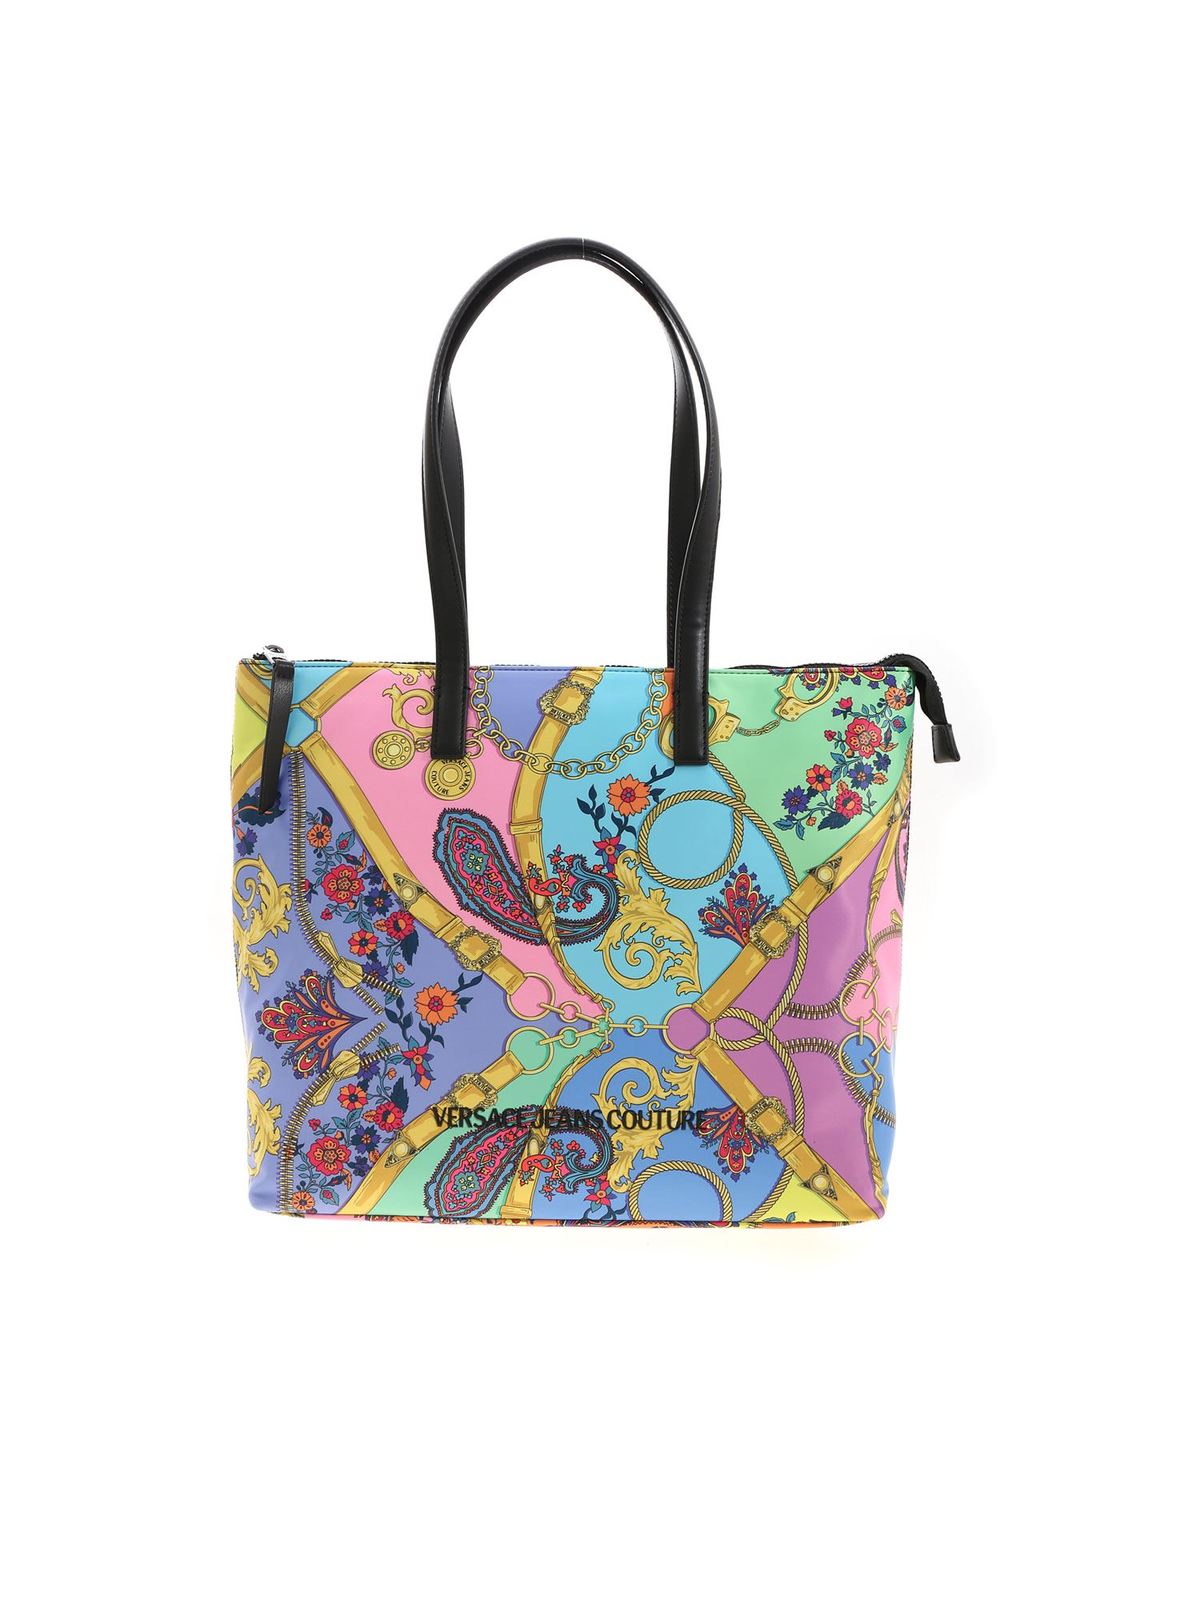 VERSACE JEANS COUTURE MULTIcolourED SHOPPING BAG